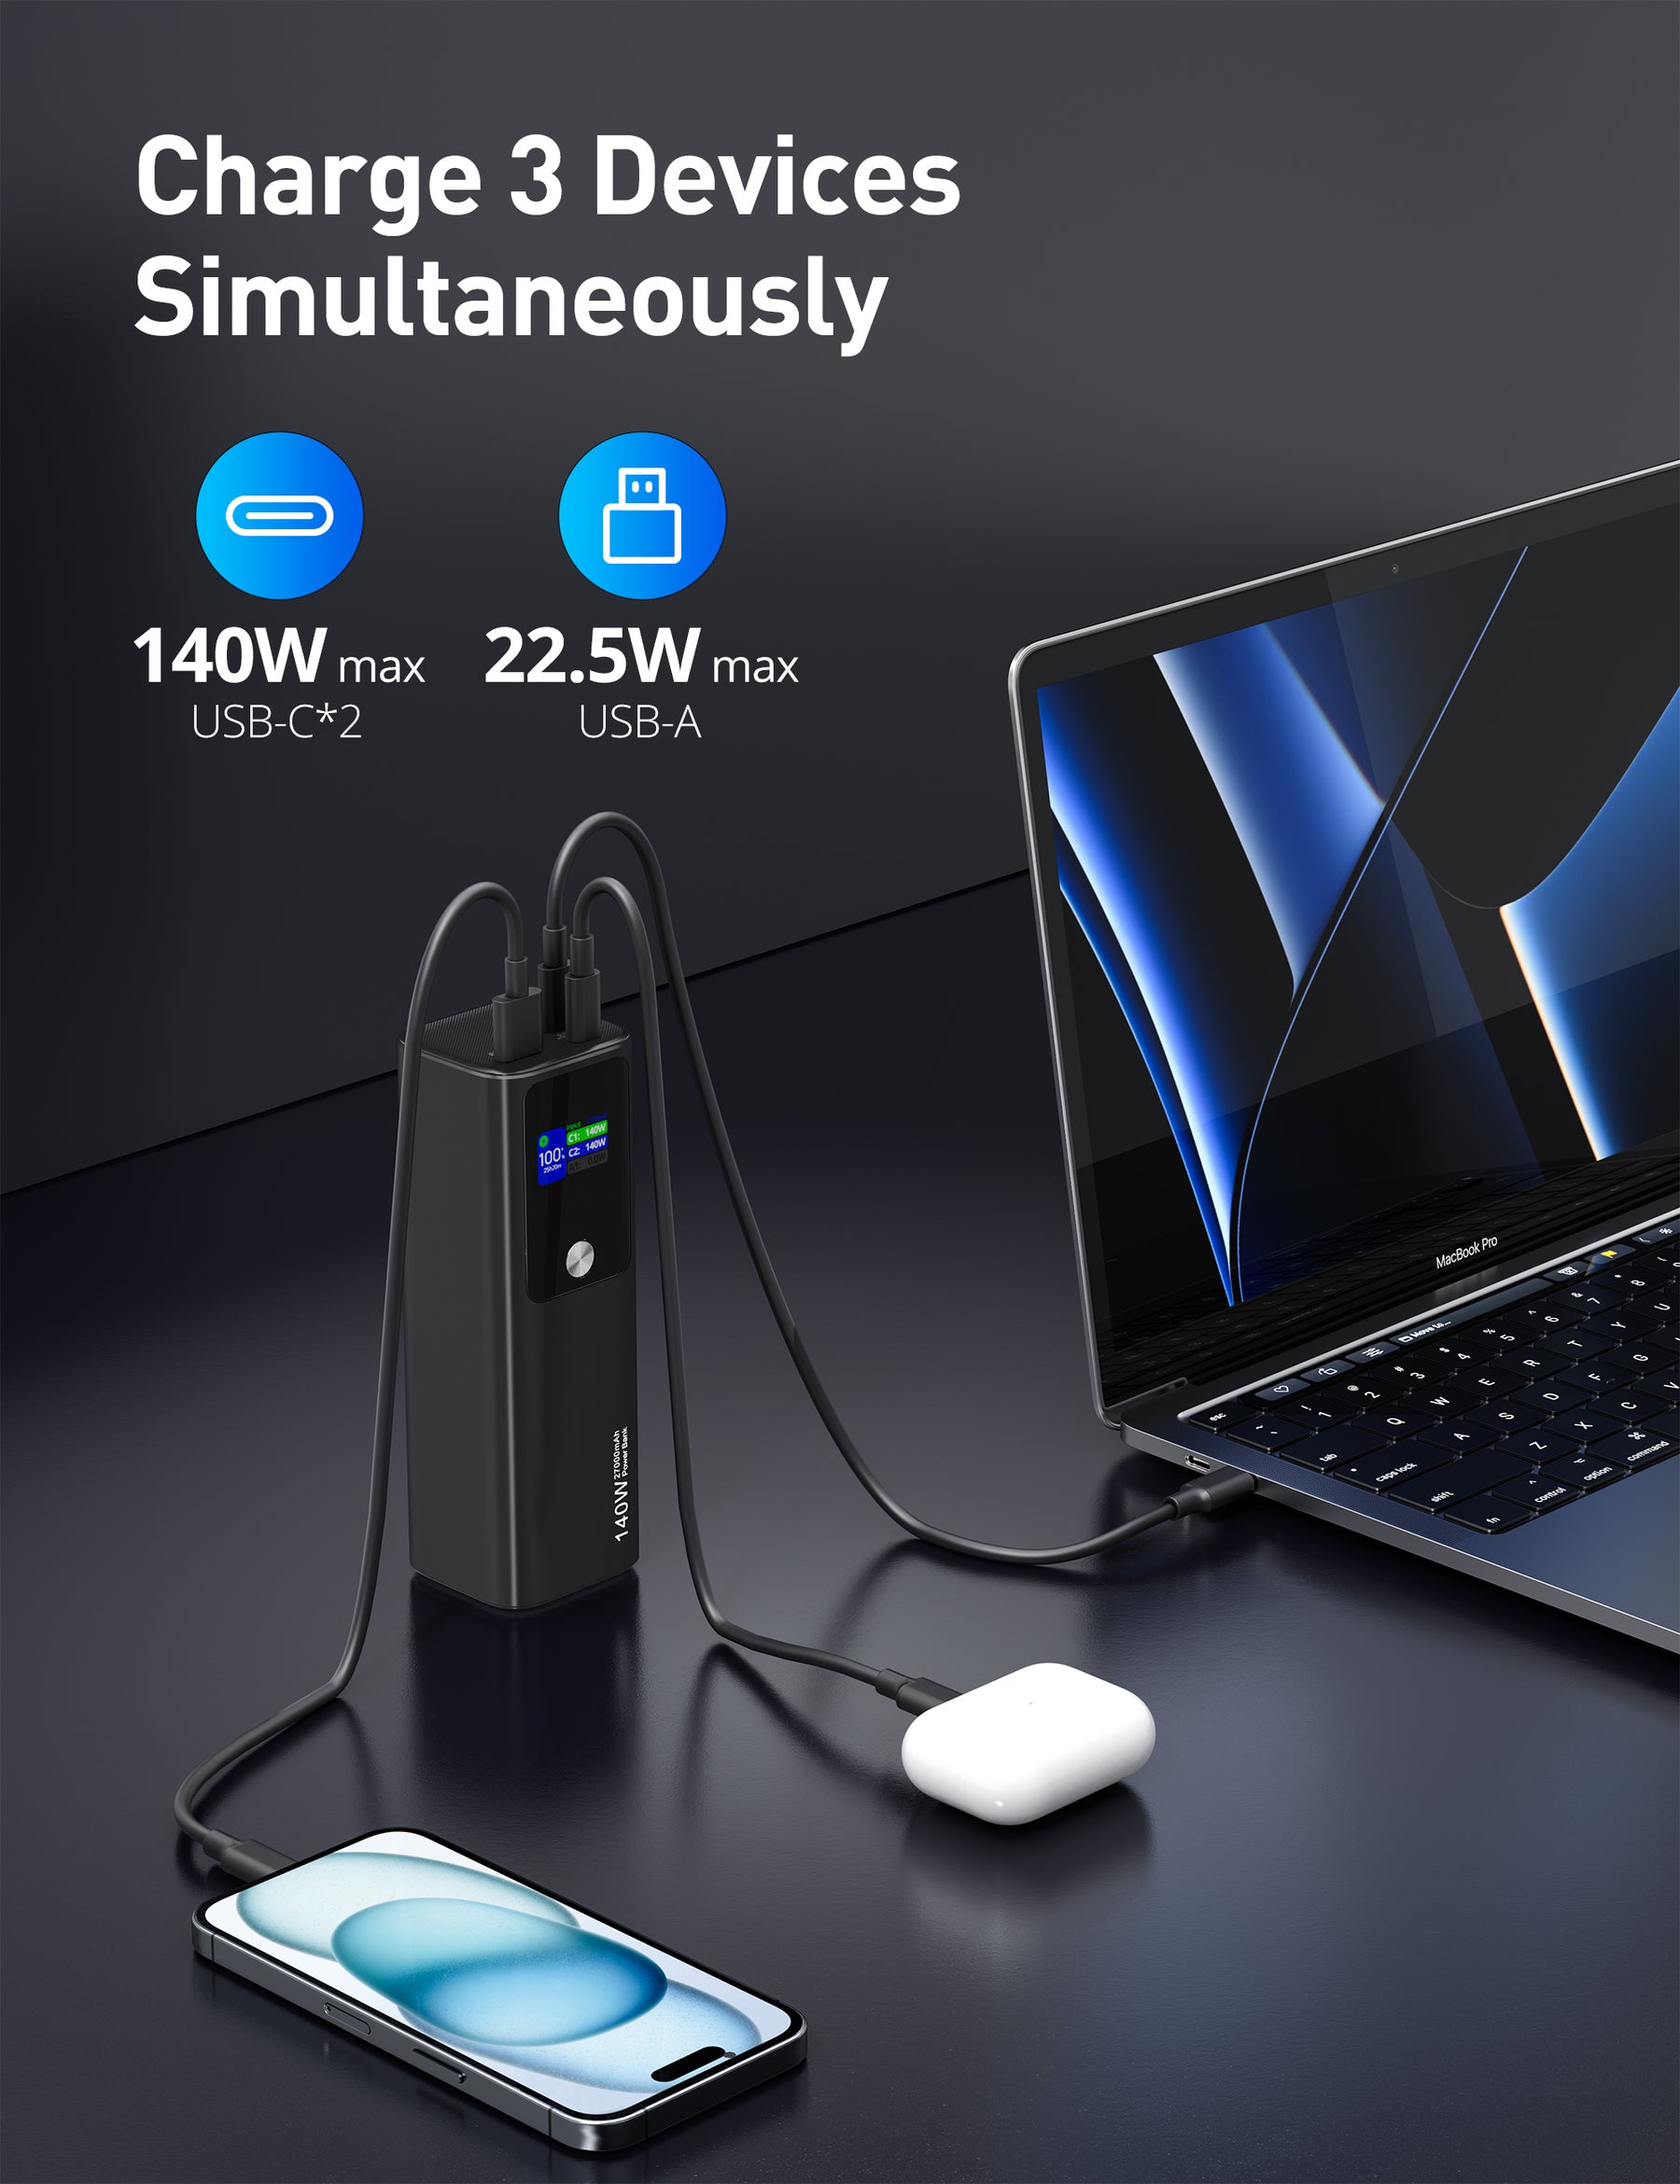 RAVPower 140W Portable Laptop Charger, 27000mAh Power Bank with 2 USB-C Output